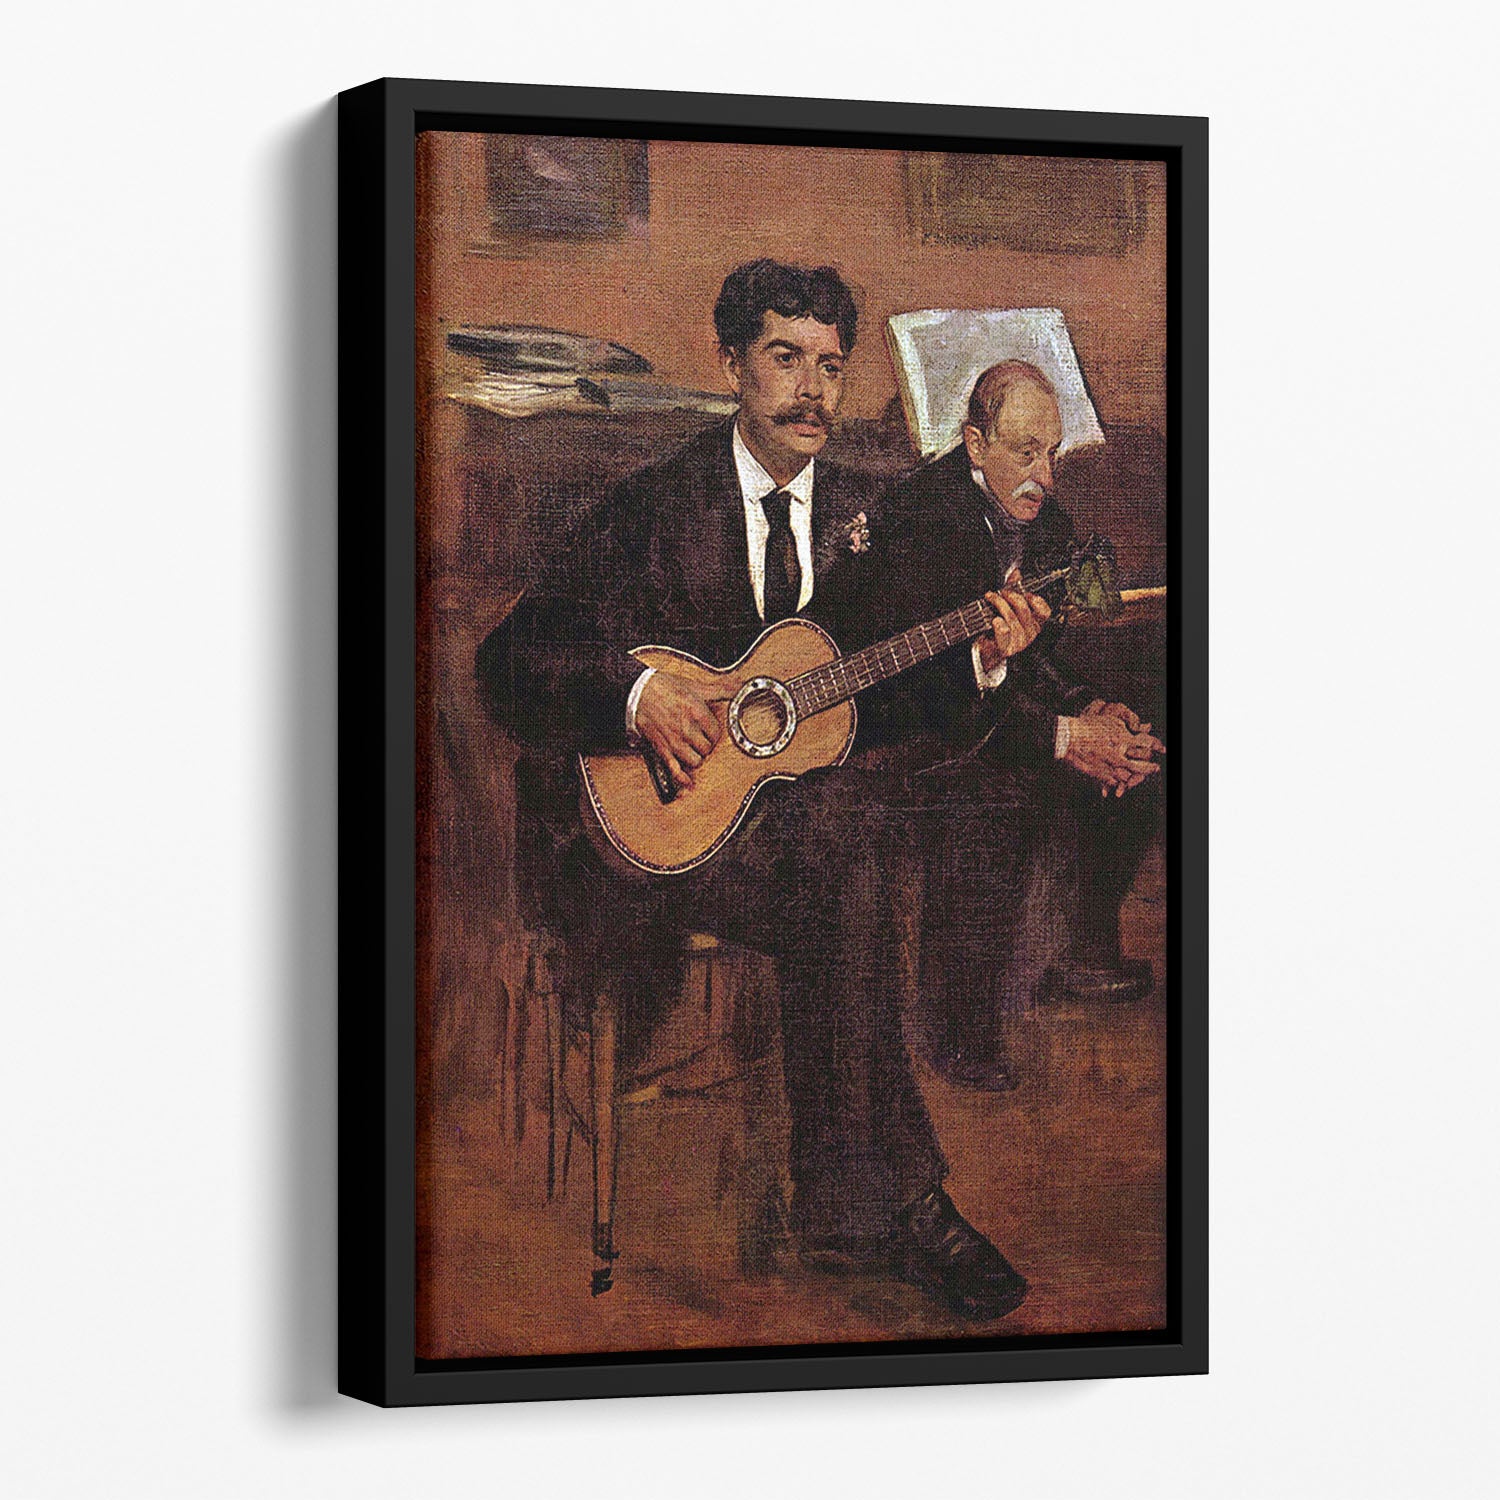 The guitarist Pagans and Monsieur Degas by Manet Floating Framed Canvas